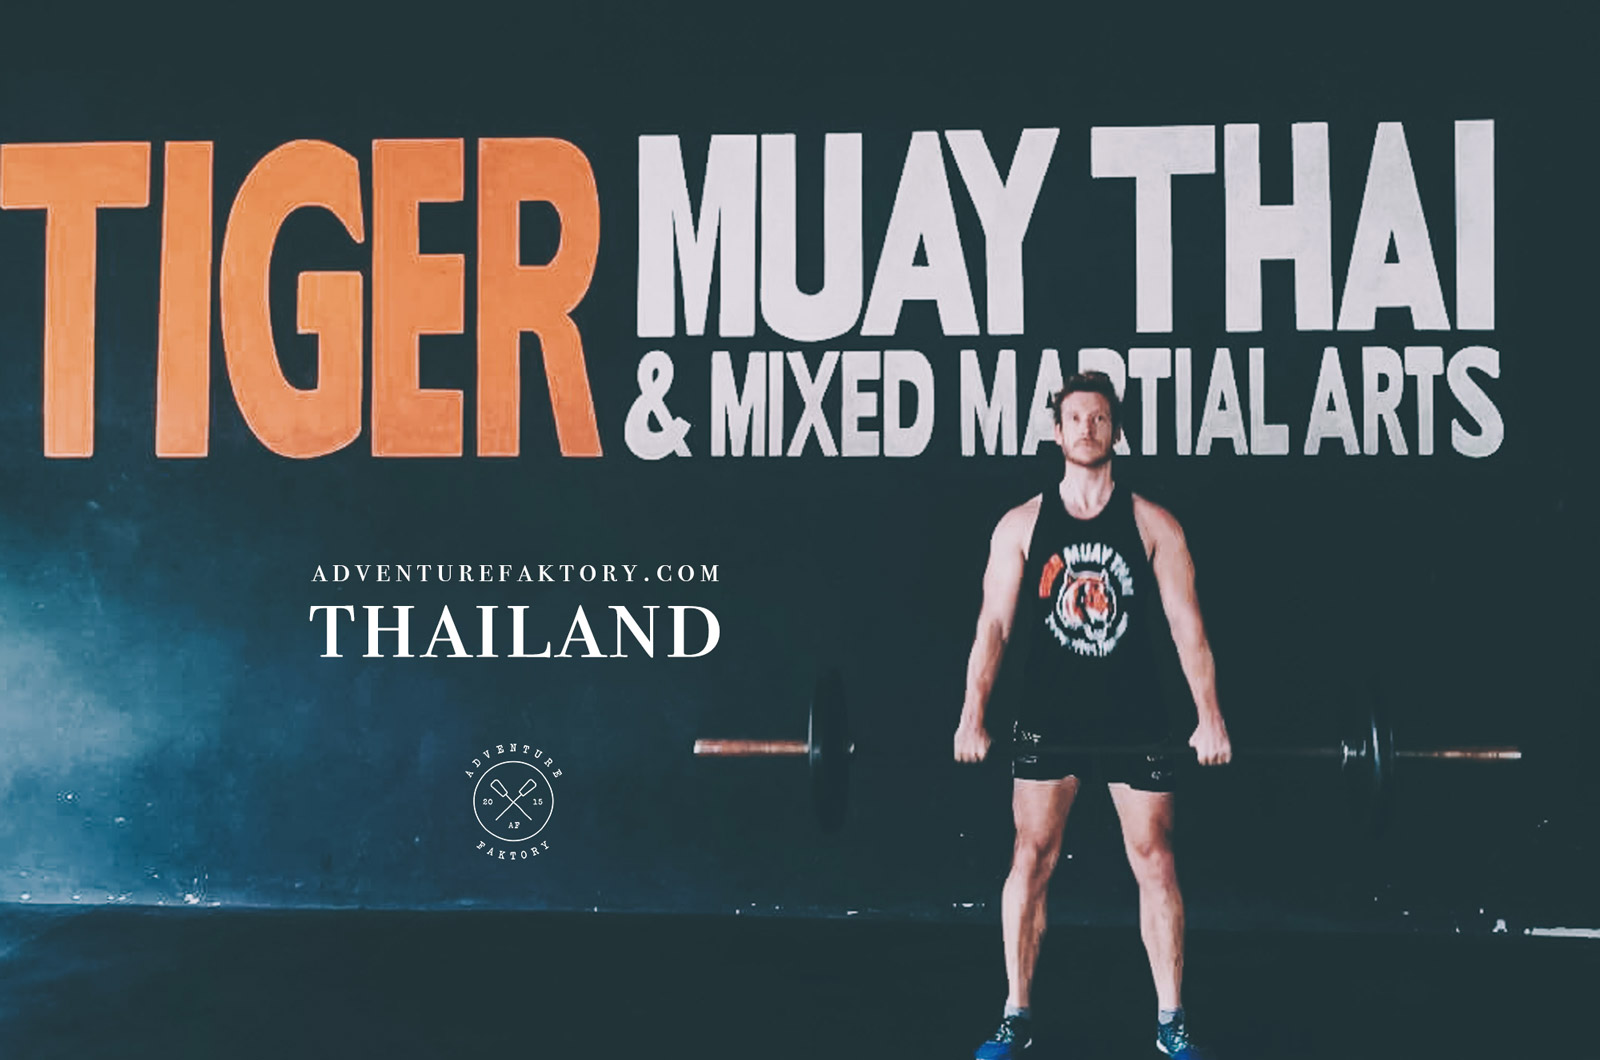 Check Out The Best Gyms In PHUKET, TIGER MUAY THAI